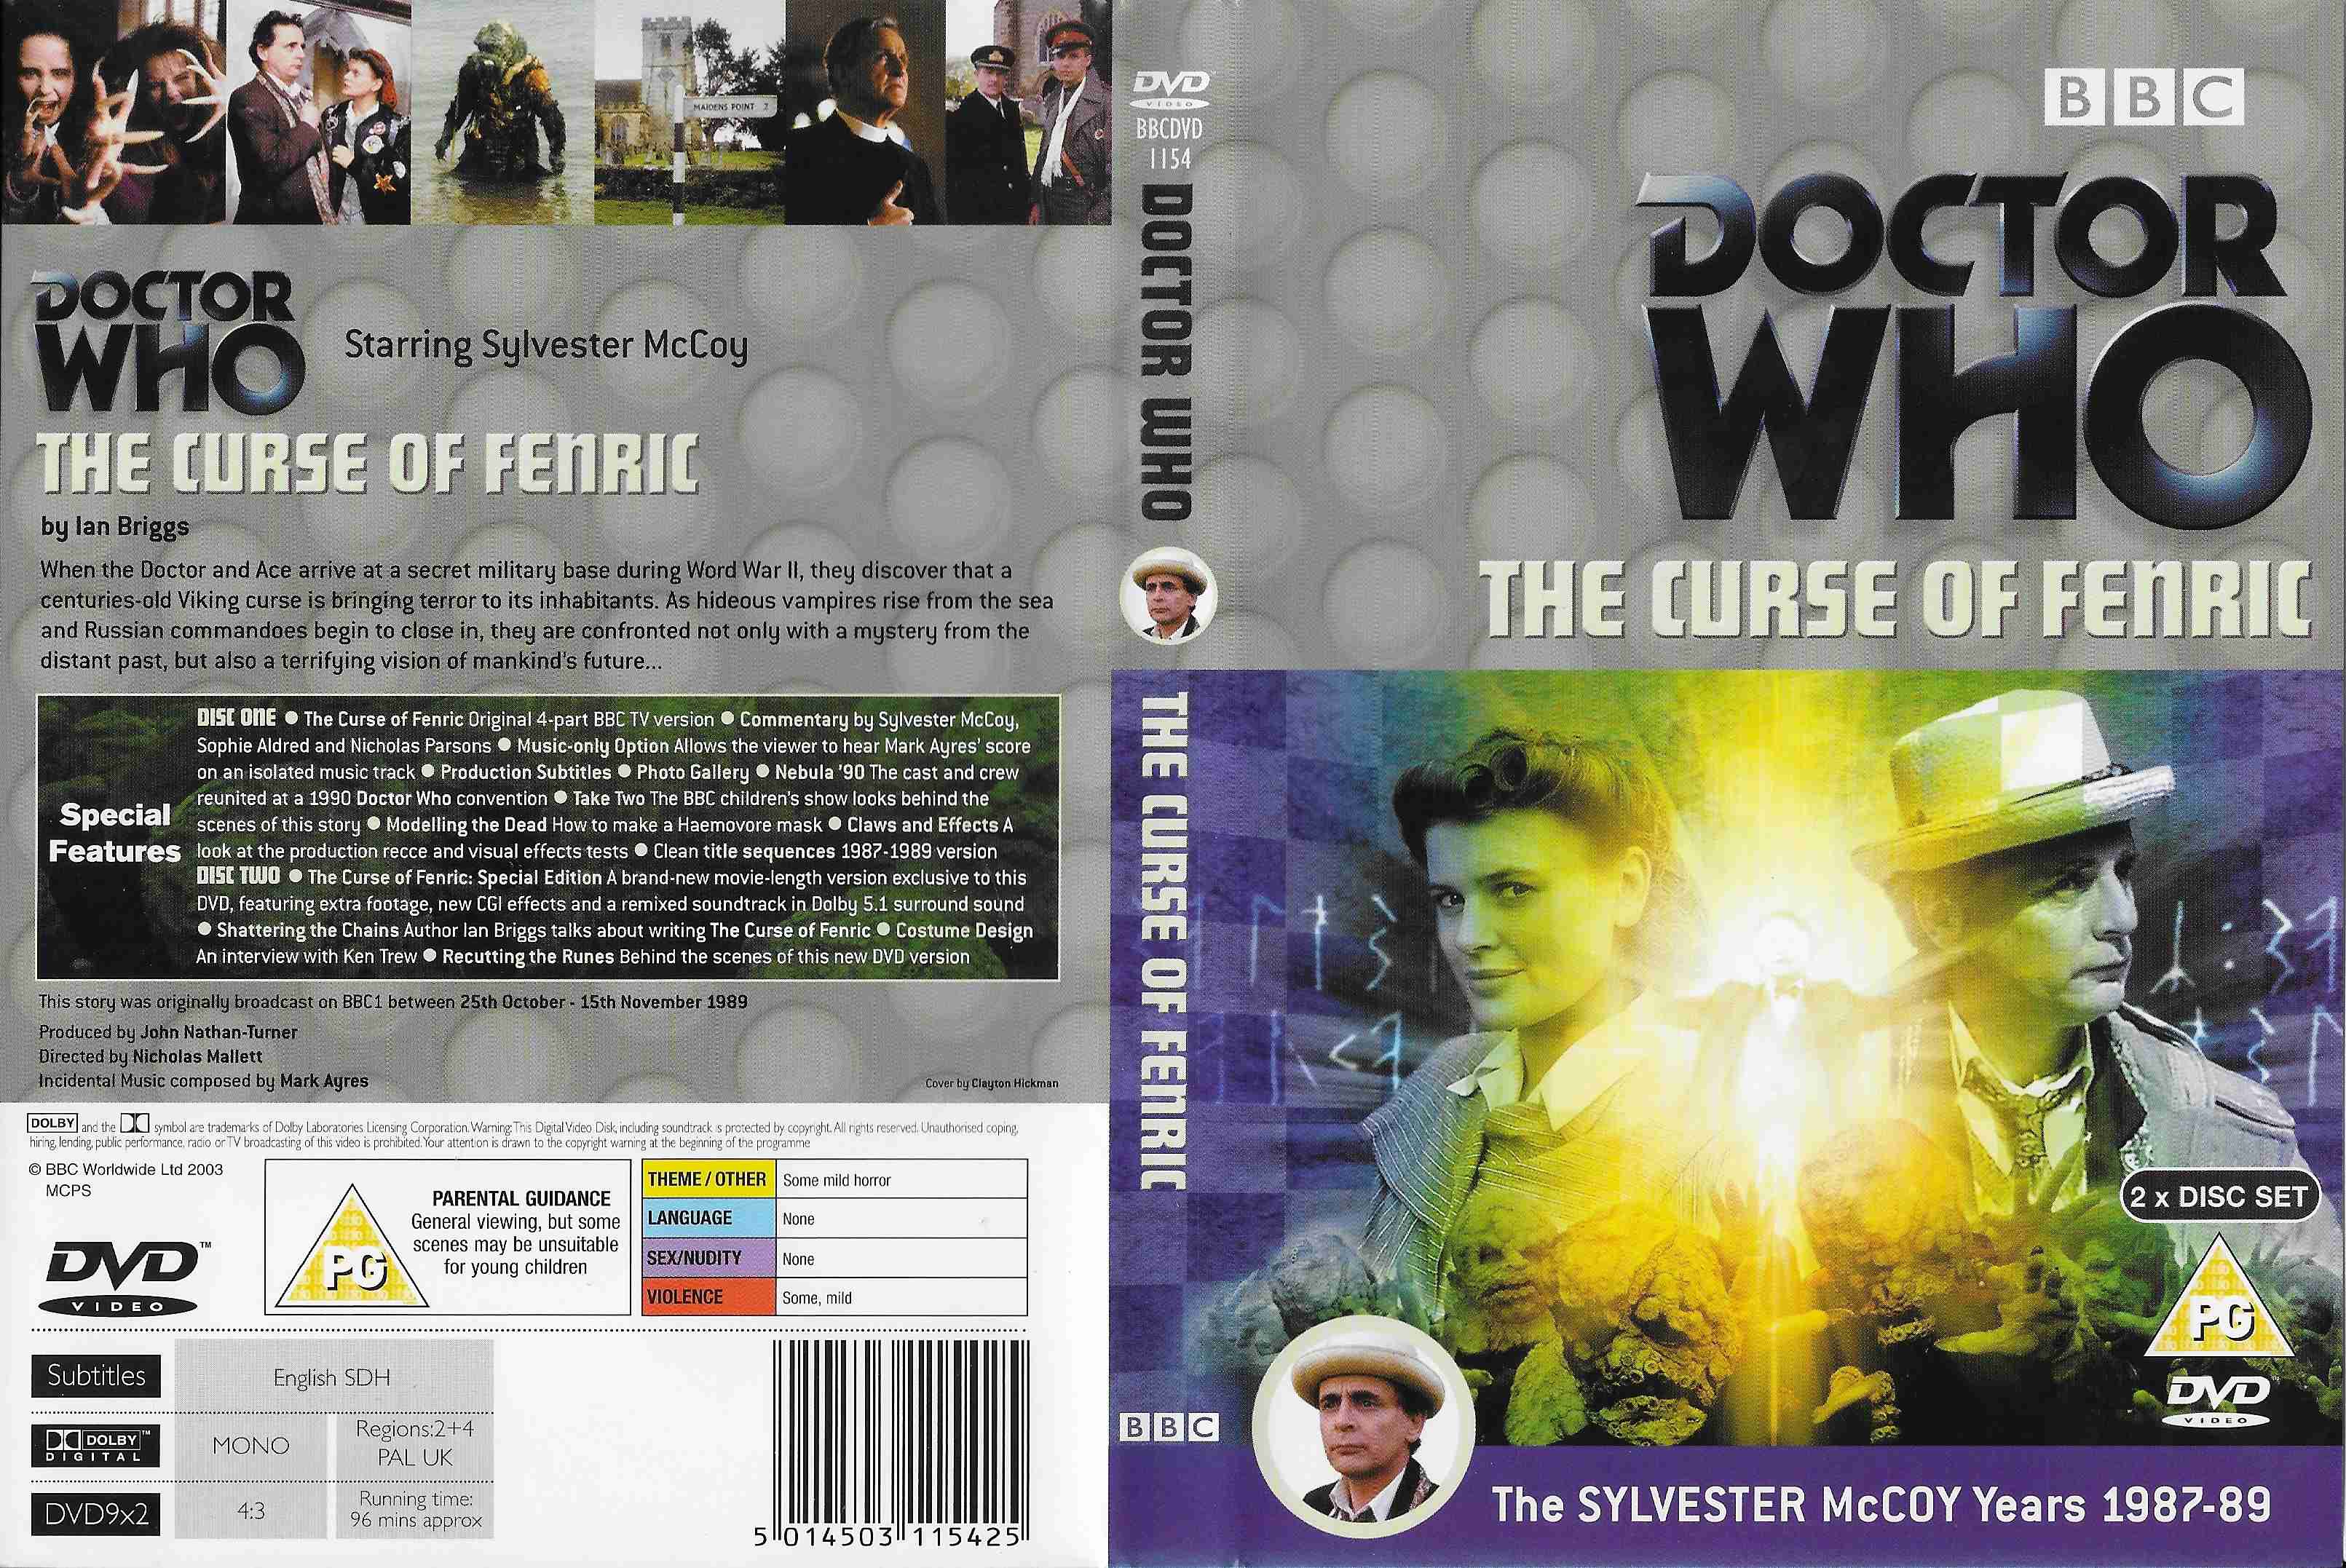 Picture of BBCDVD 1154 Doctor Who - The curse of Fenric by artist Ian Briggs from the BBC records and Tapes library